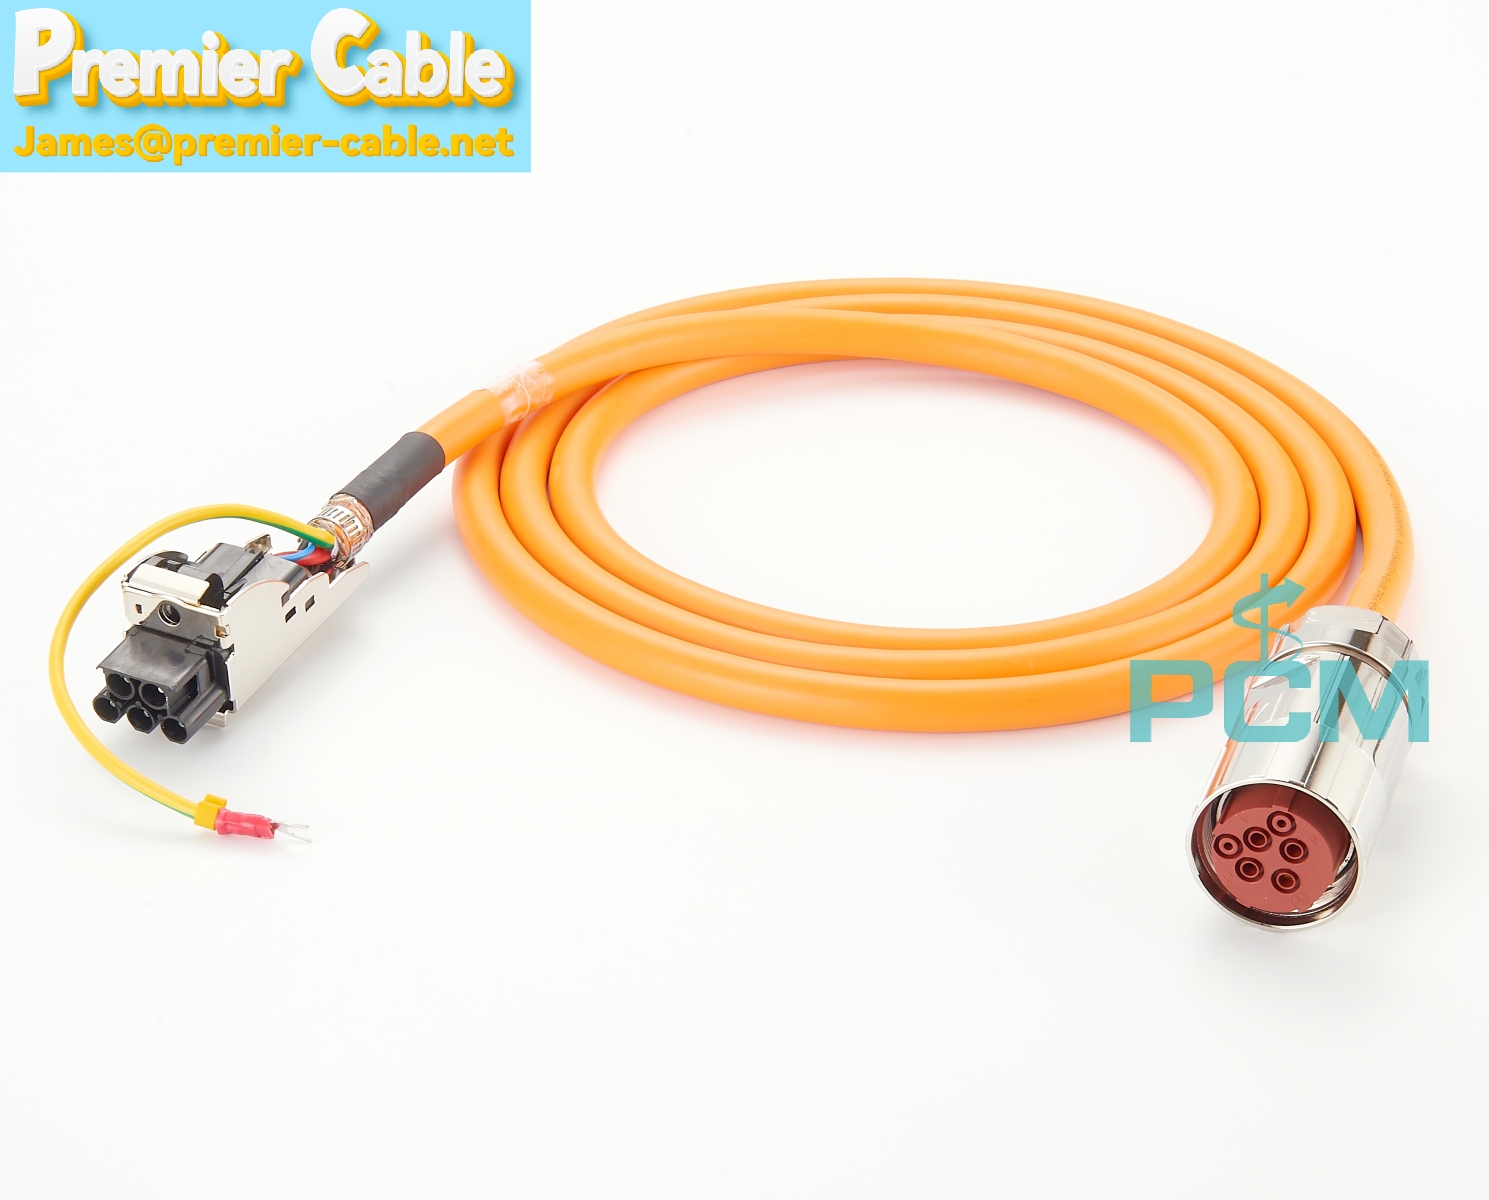 M40 motor power cable with S120 Power Connector